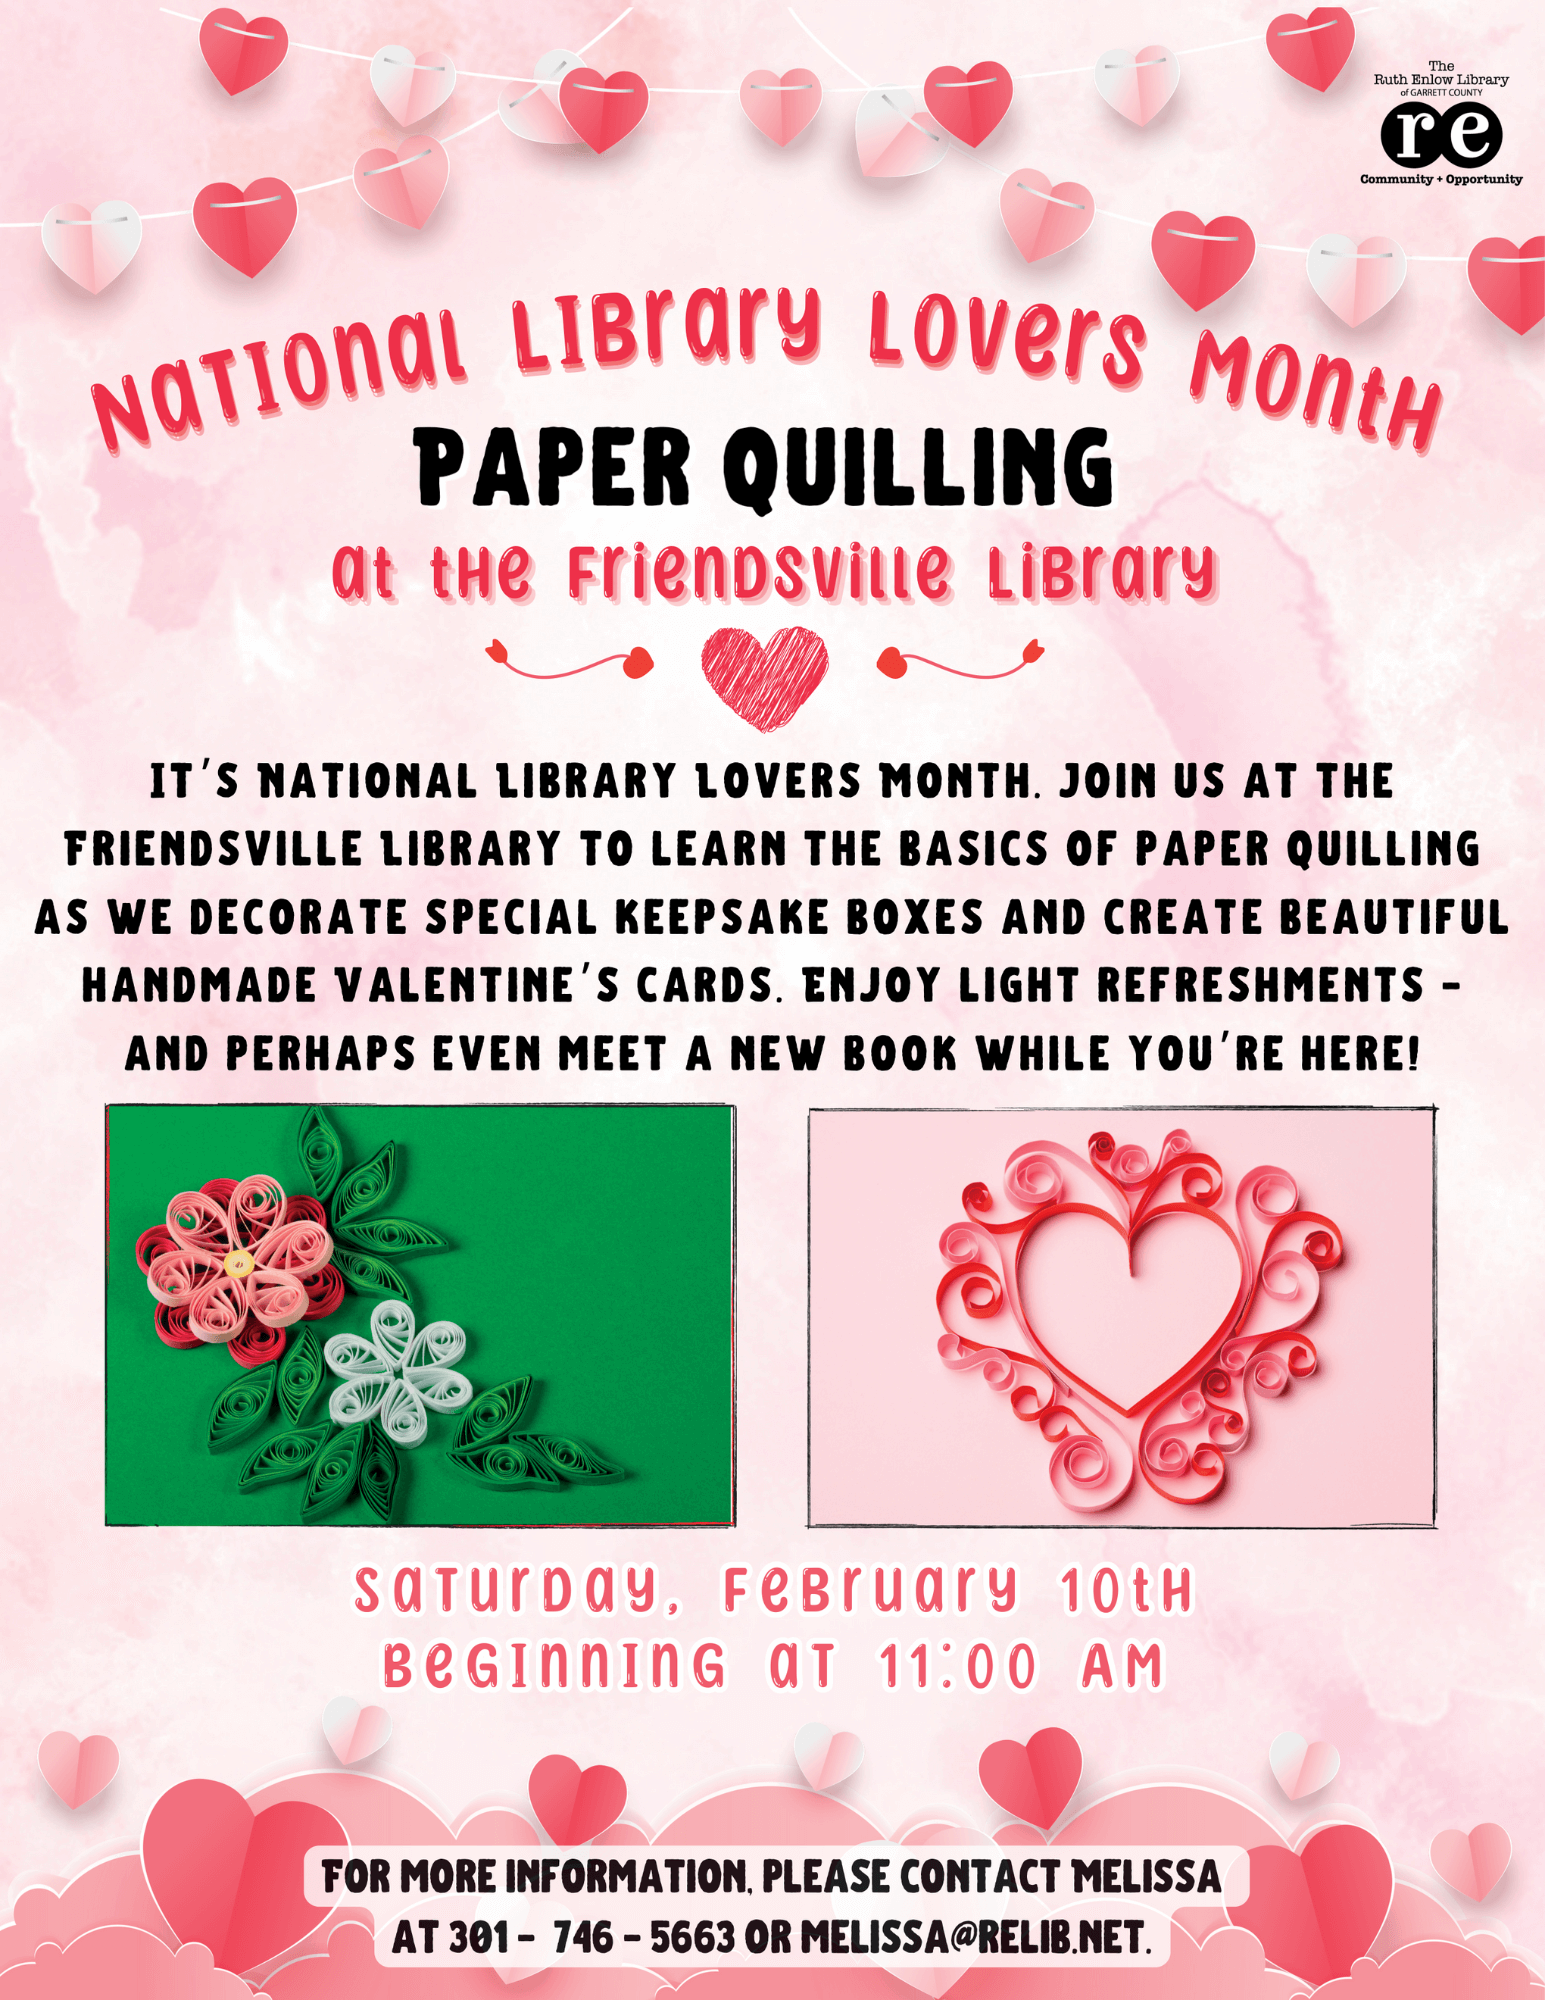 Nat'l Library Lovers Month-Paper Quilling at Deep Creek Lake, MD